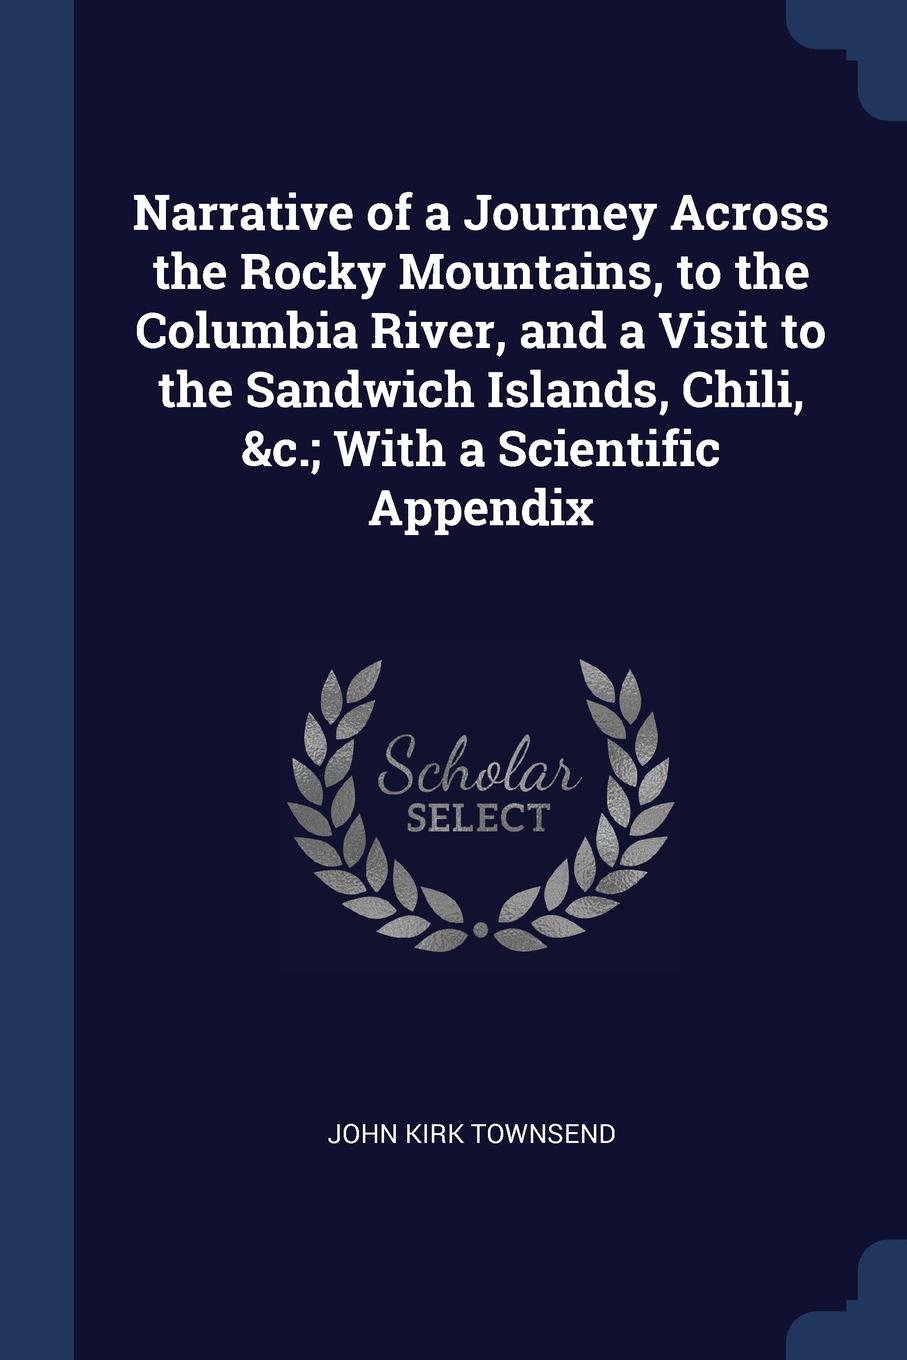 Narrative of a Journey Across the Rocky Mountains, to the Columbia River, and a Visit to the Sandwich Islands, Chili, .c.; With a Scientific Appendix